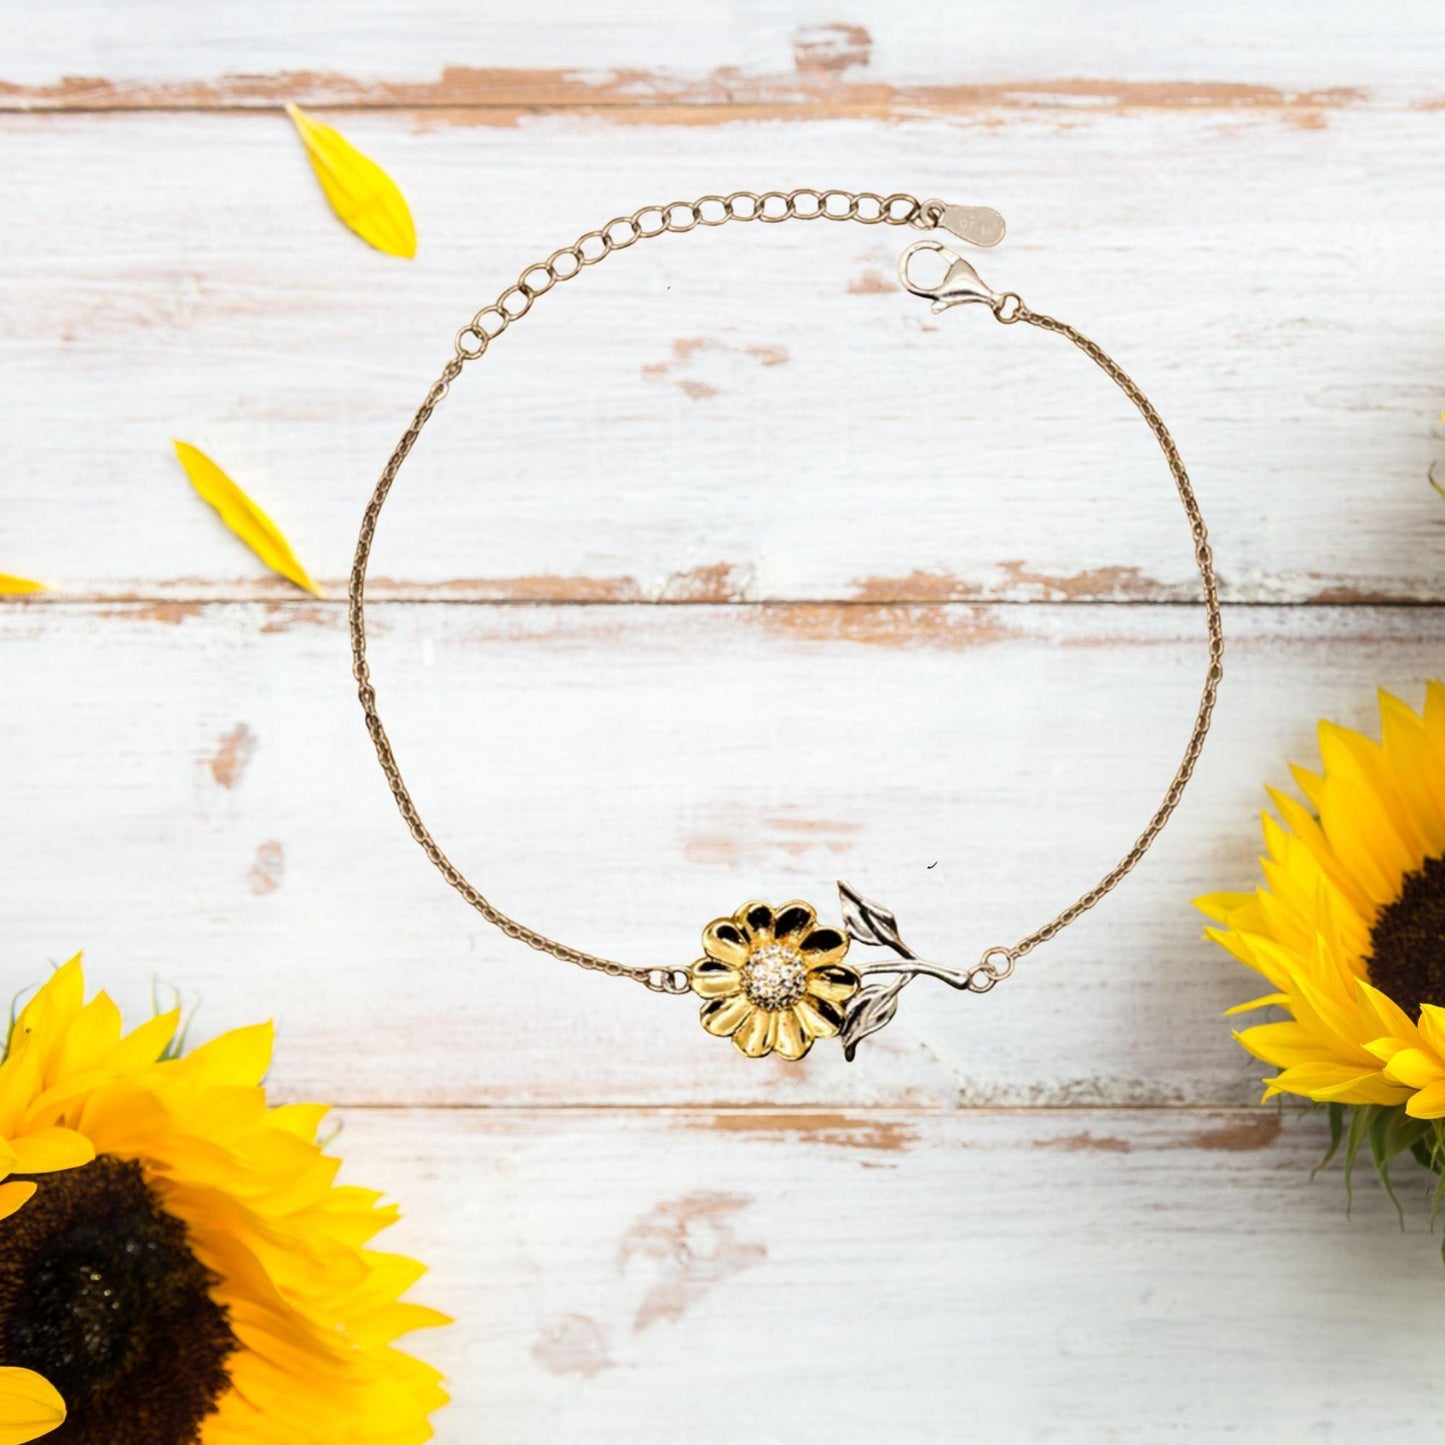 Sailor Sunflower Bracelet - Thanks for being who you are - Birthday Christmas Jewelry Gifts Coworkers Colleague Boss - Mallard Moon Gift Shop